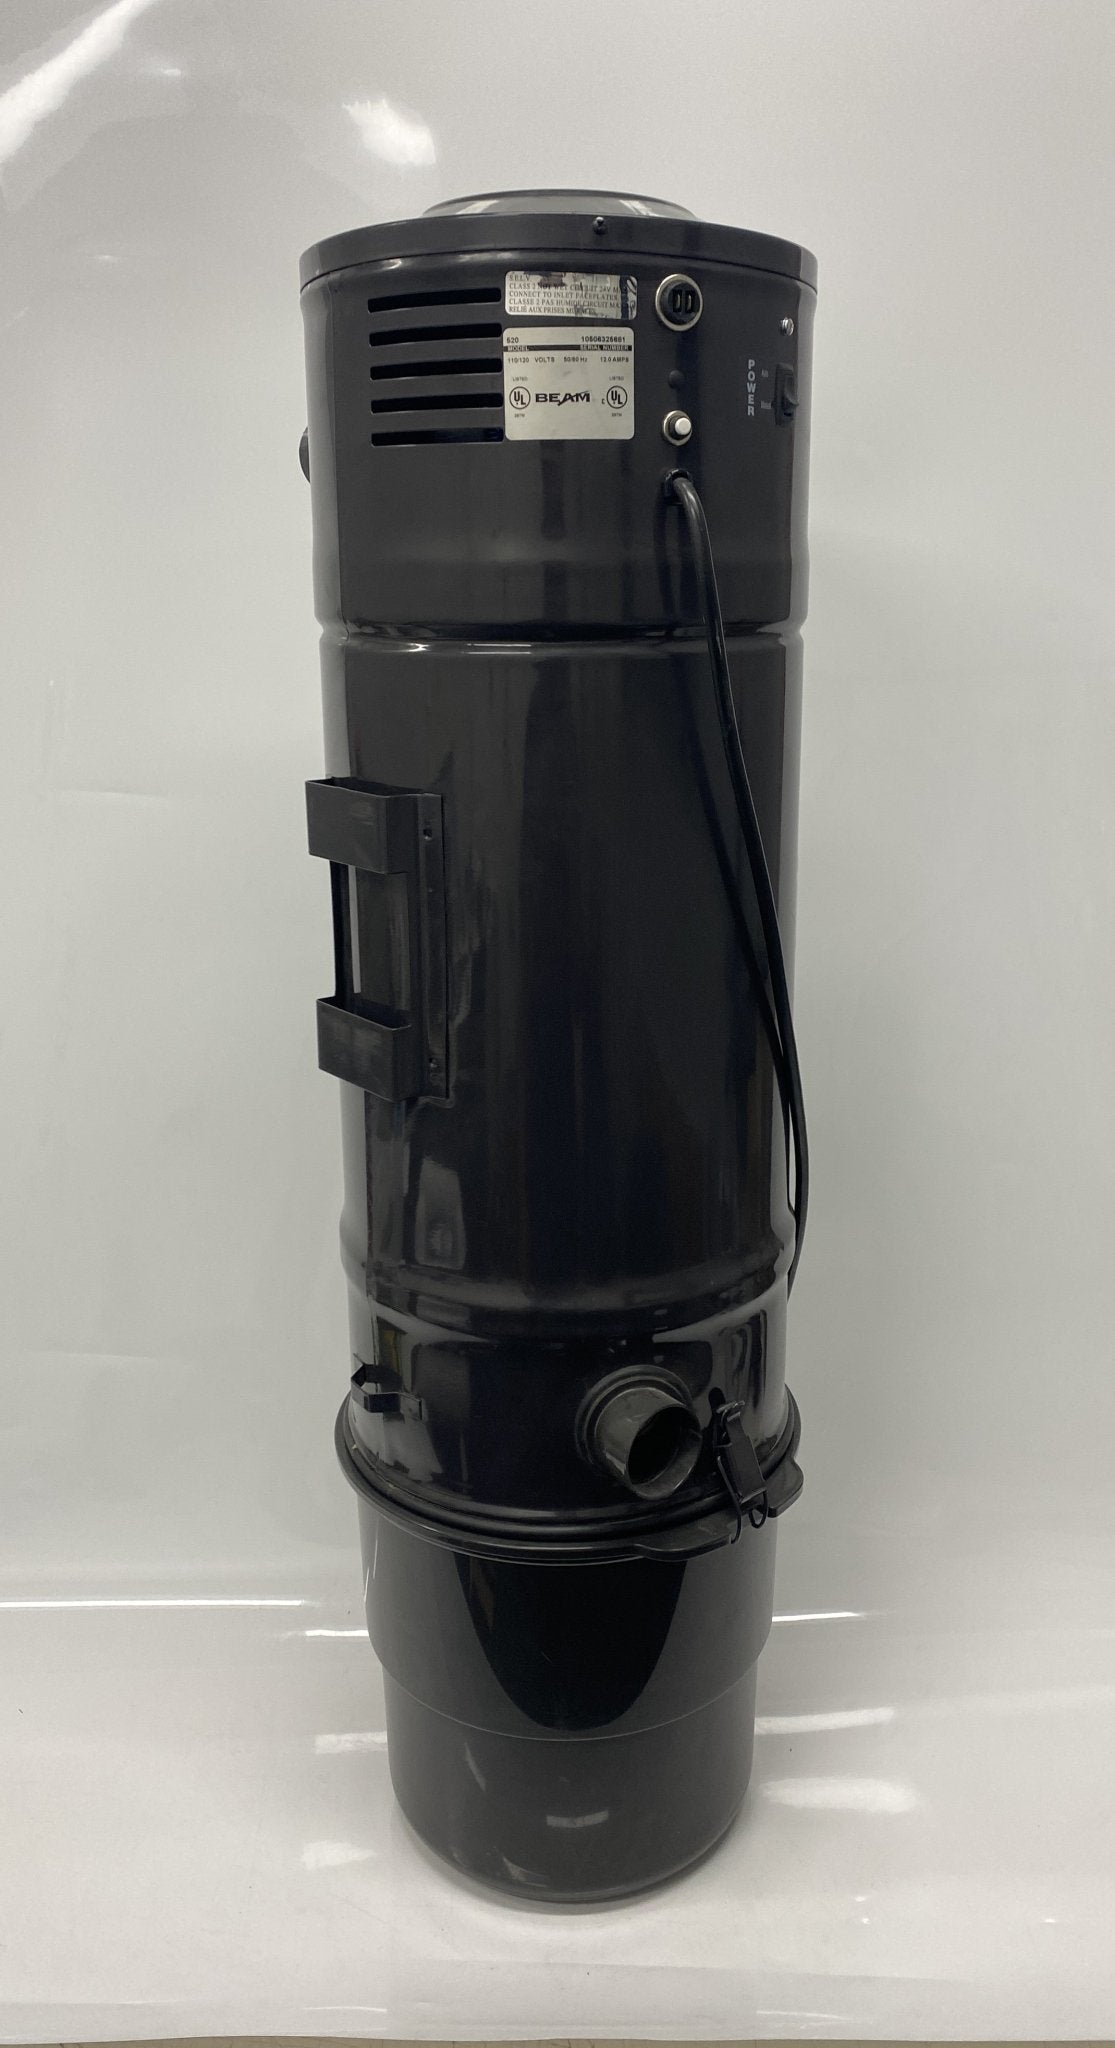 Beam 520 Central Vacuum System with Brand New Kit